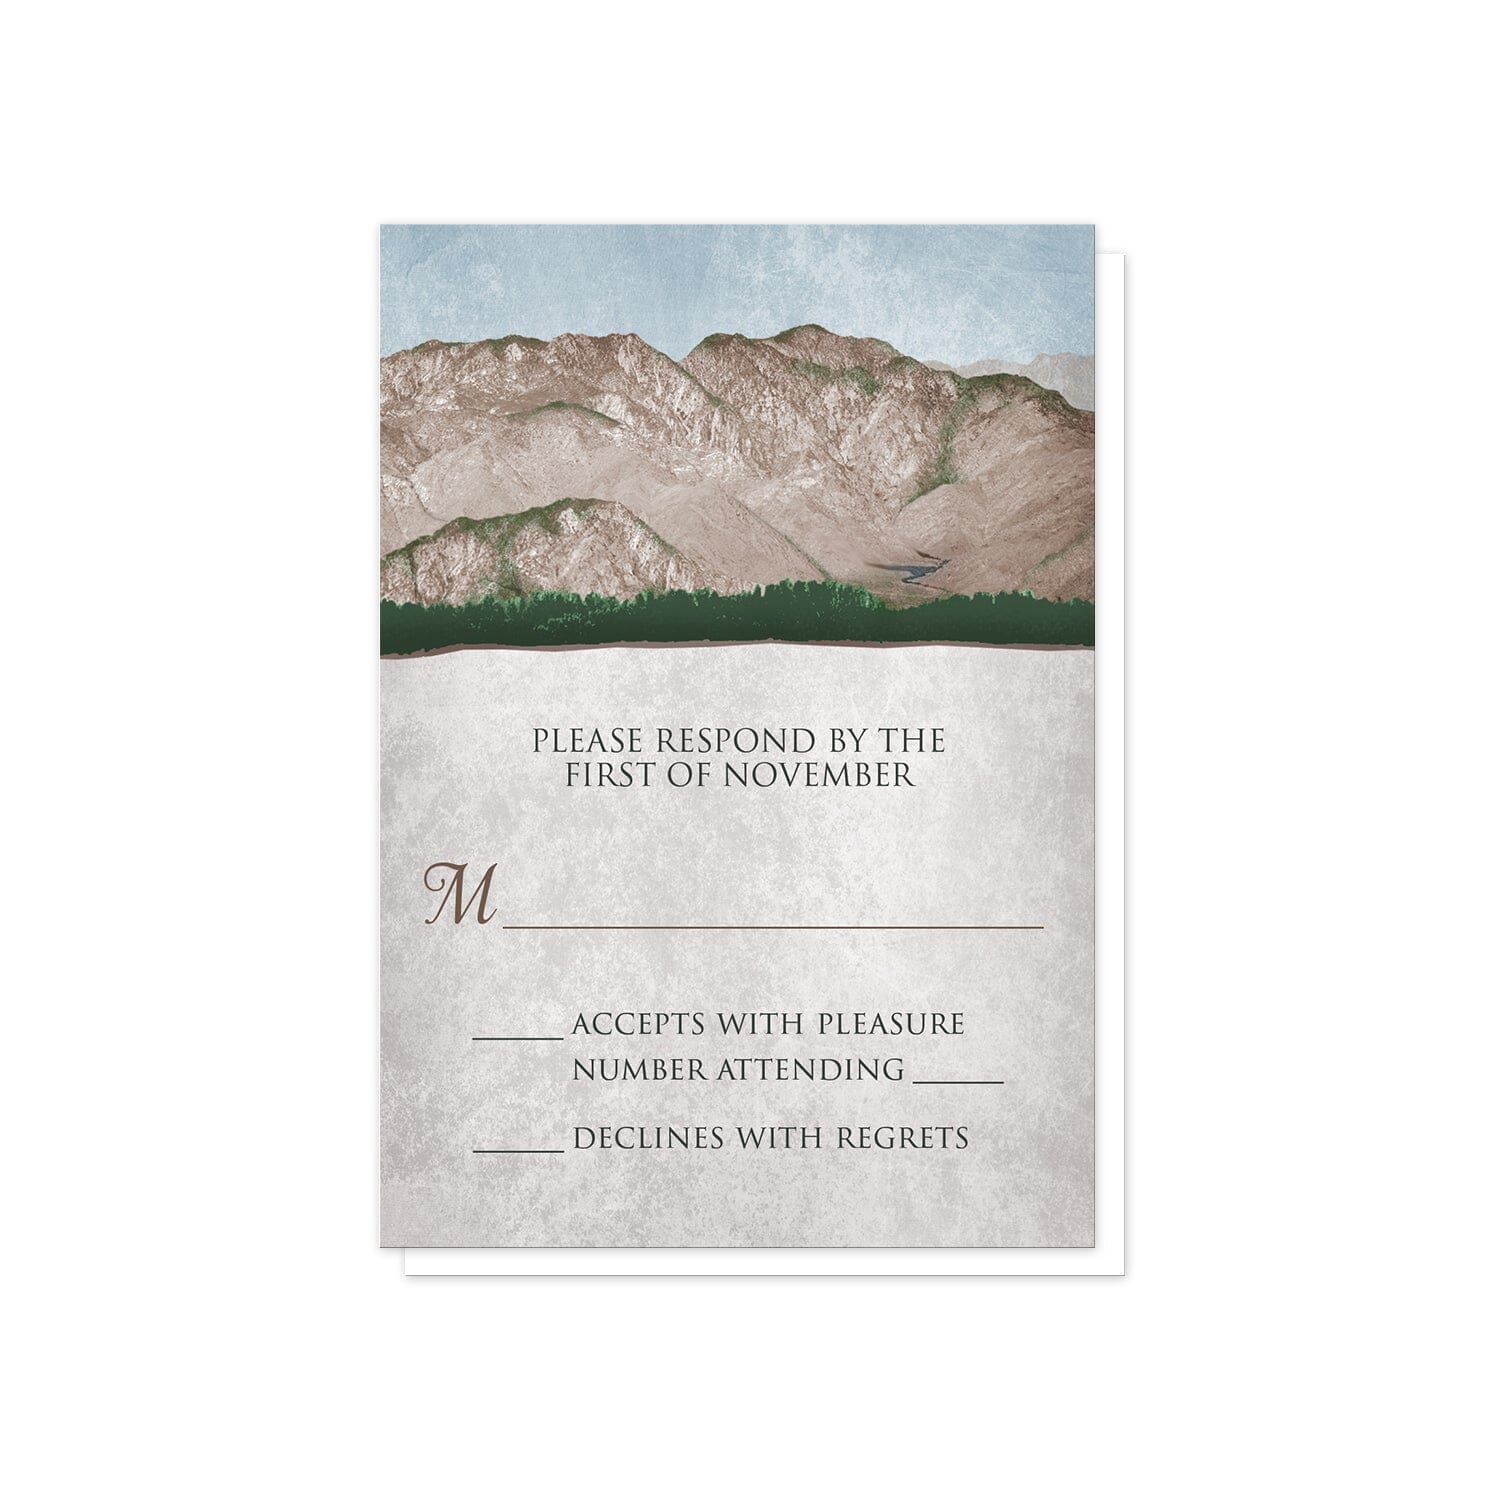 Rustic Mountain Scene RSVP Cards at Artistically Invited.